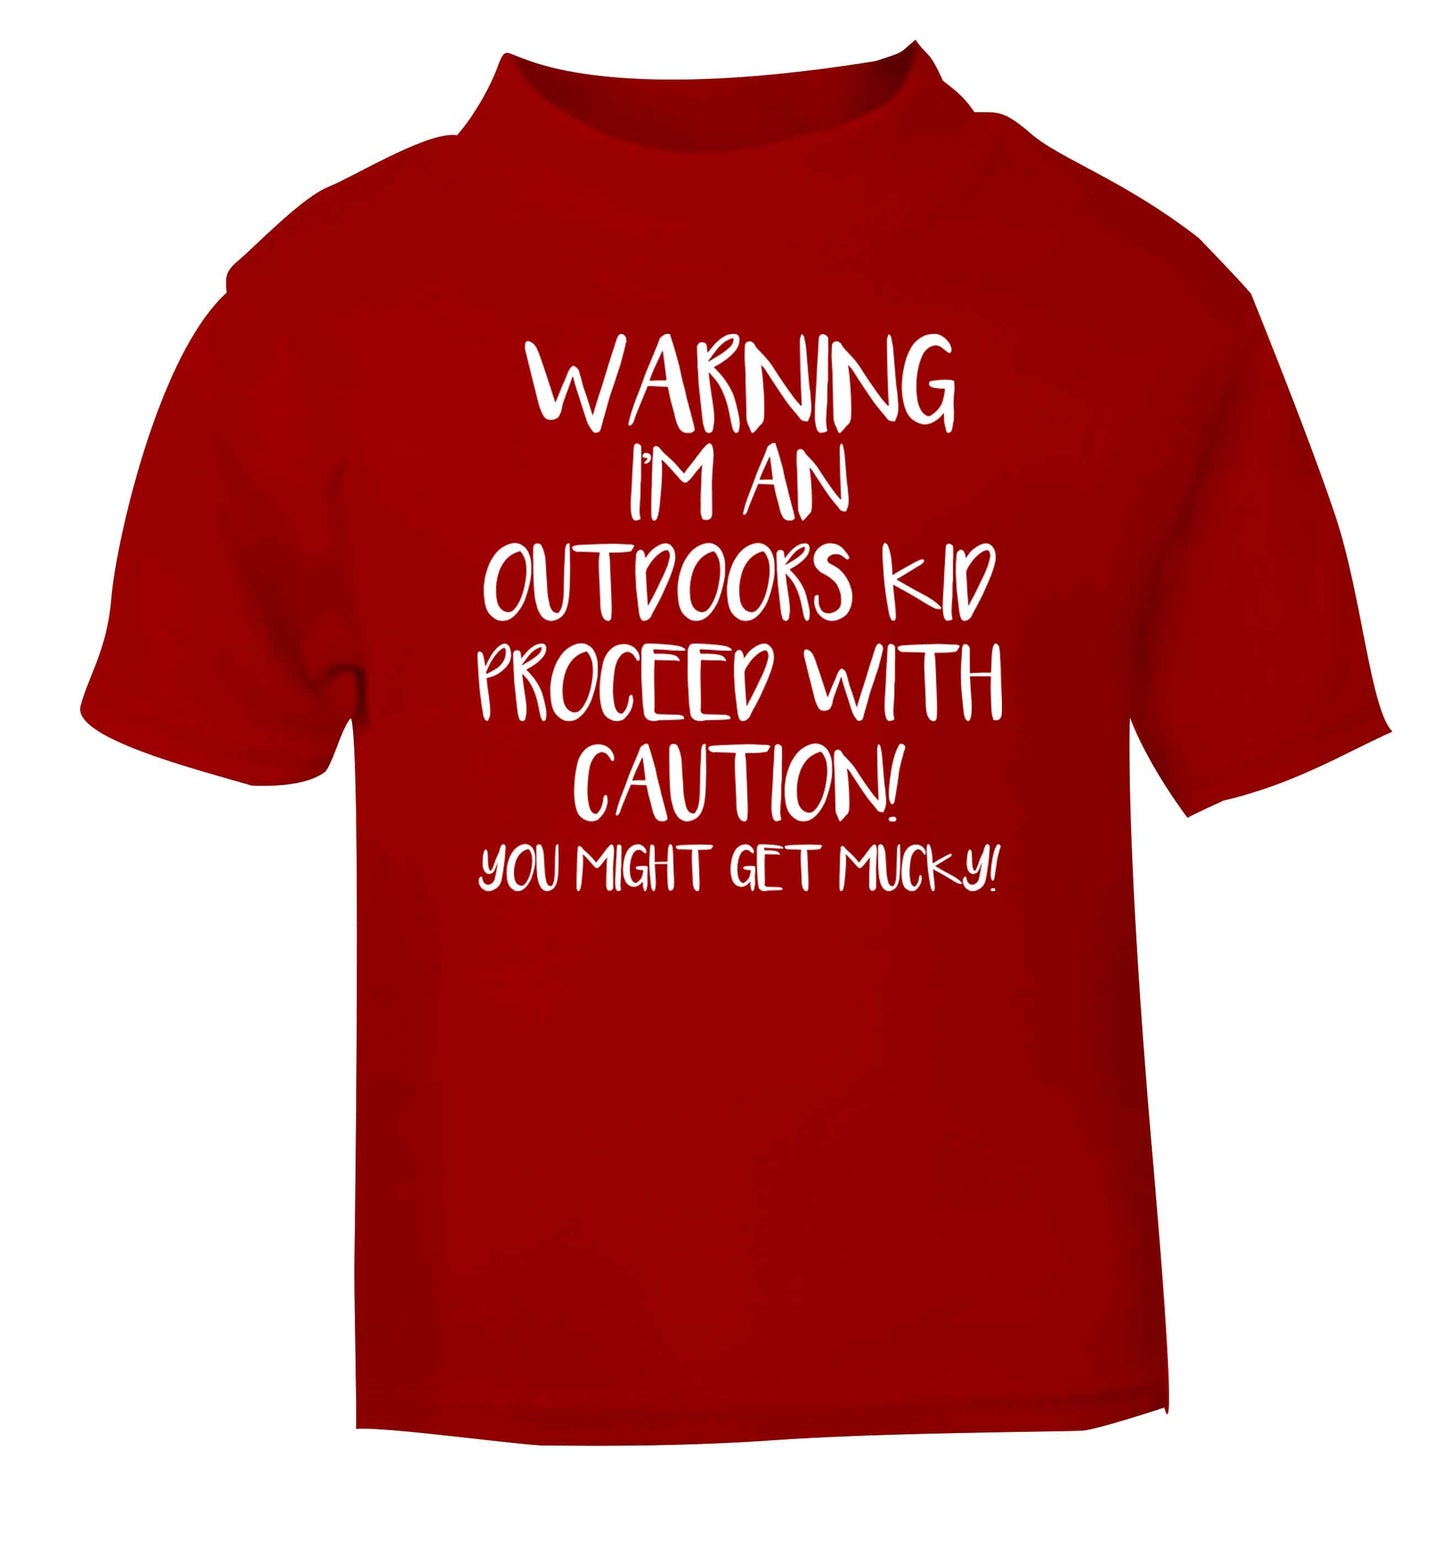 Warning I'm an outdoors kid! Proceed with caution you might get mucky red Baby Toddler Tshirt 2 Years